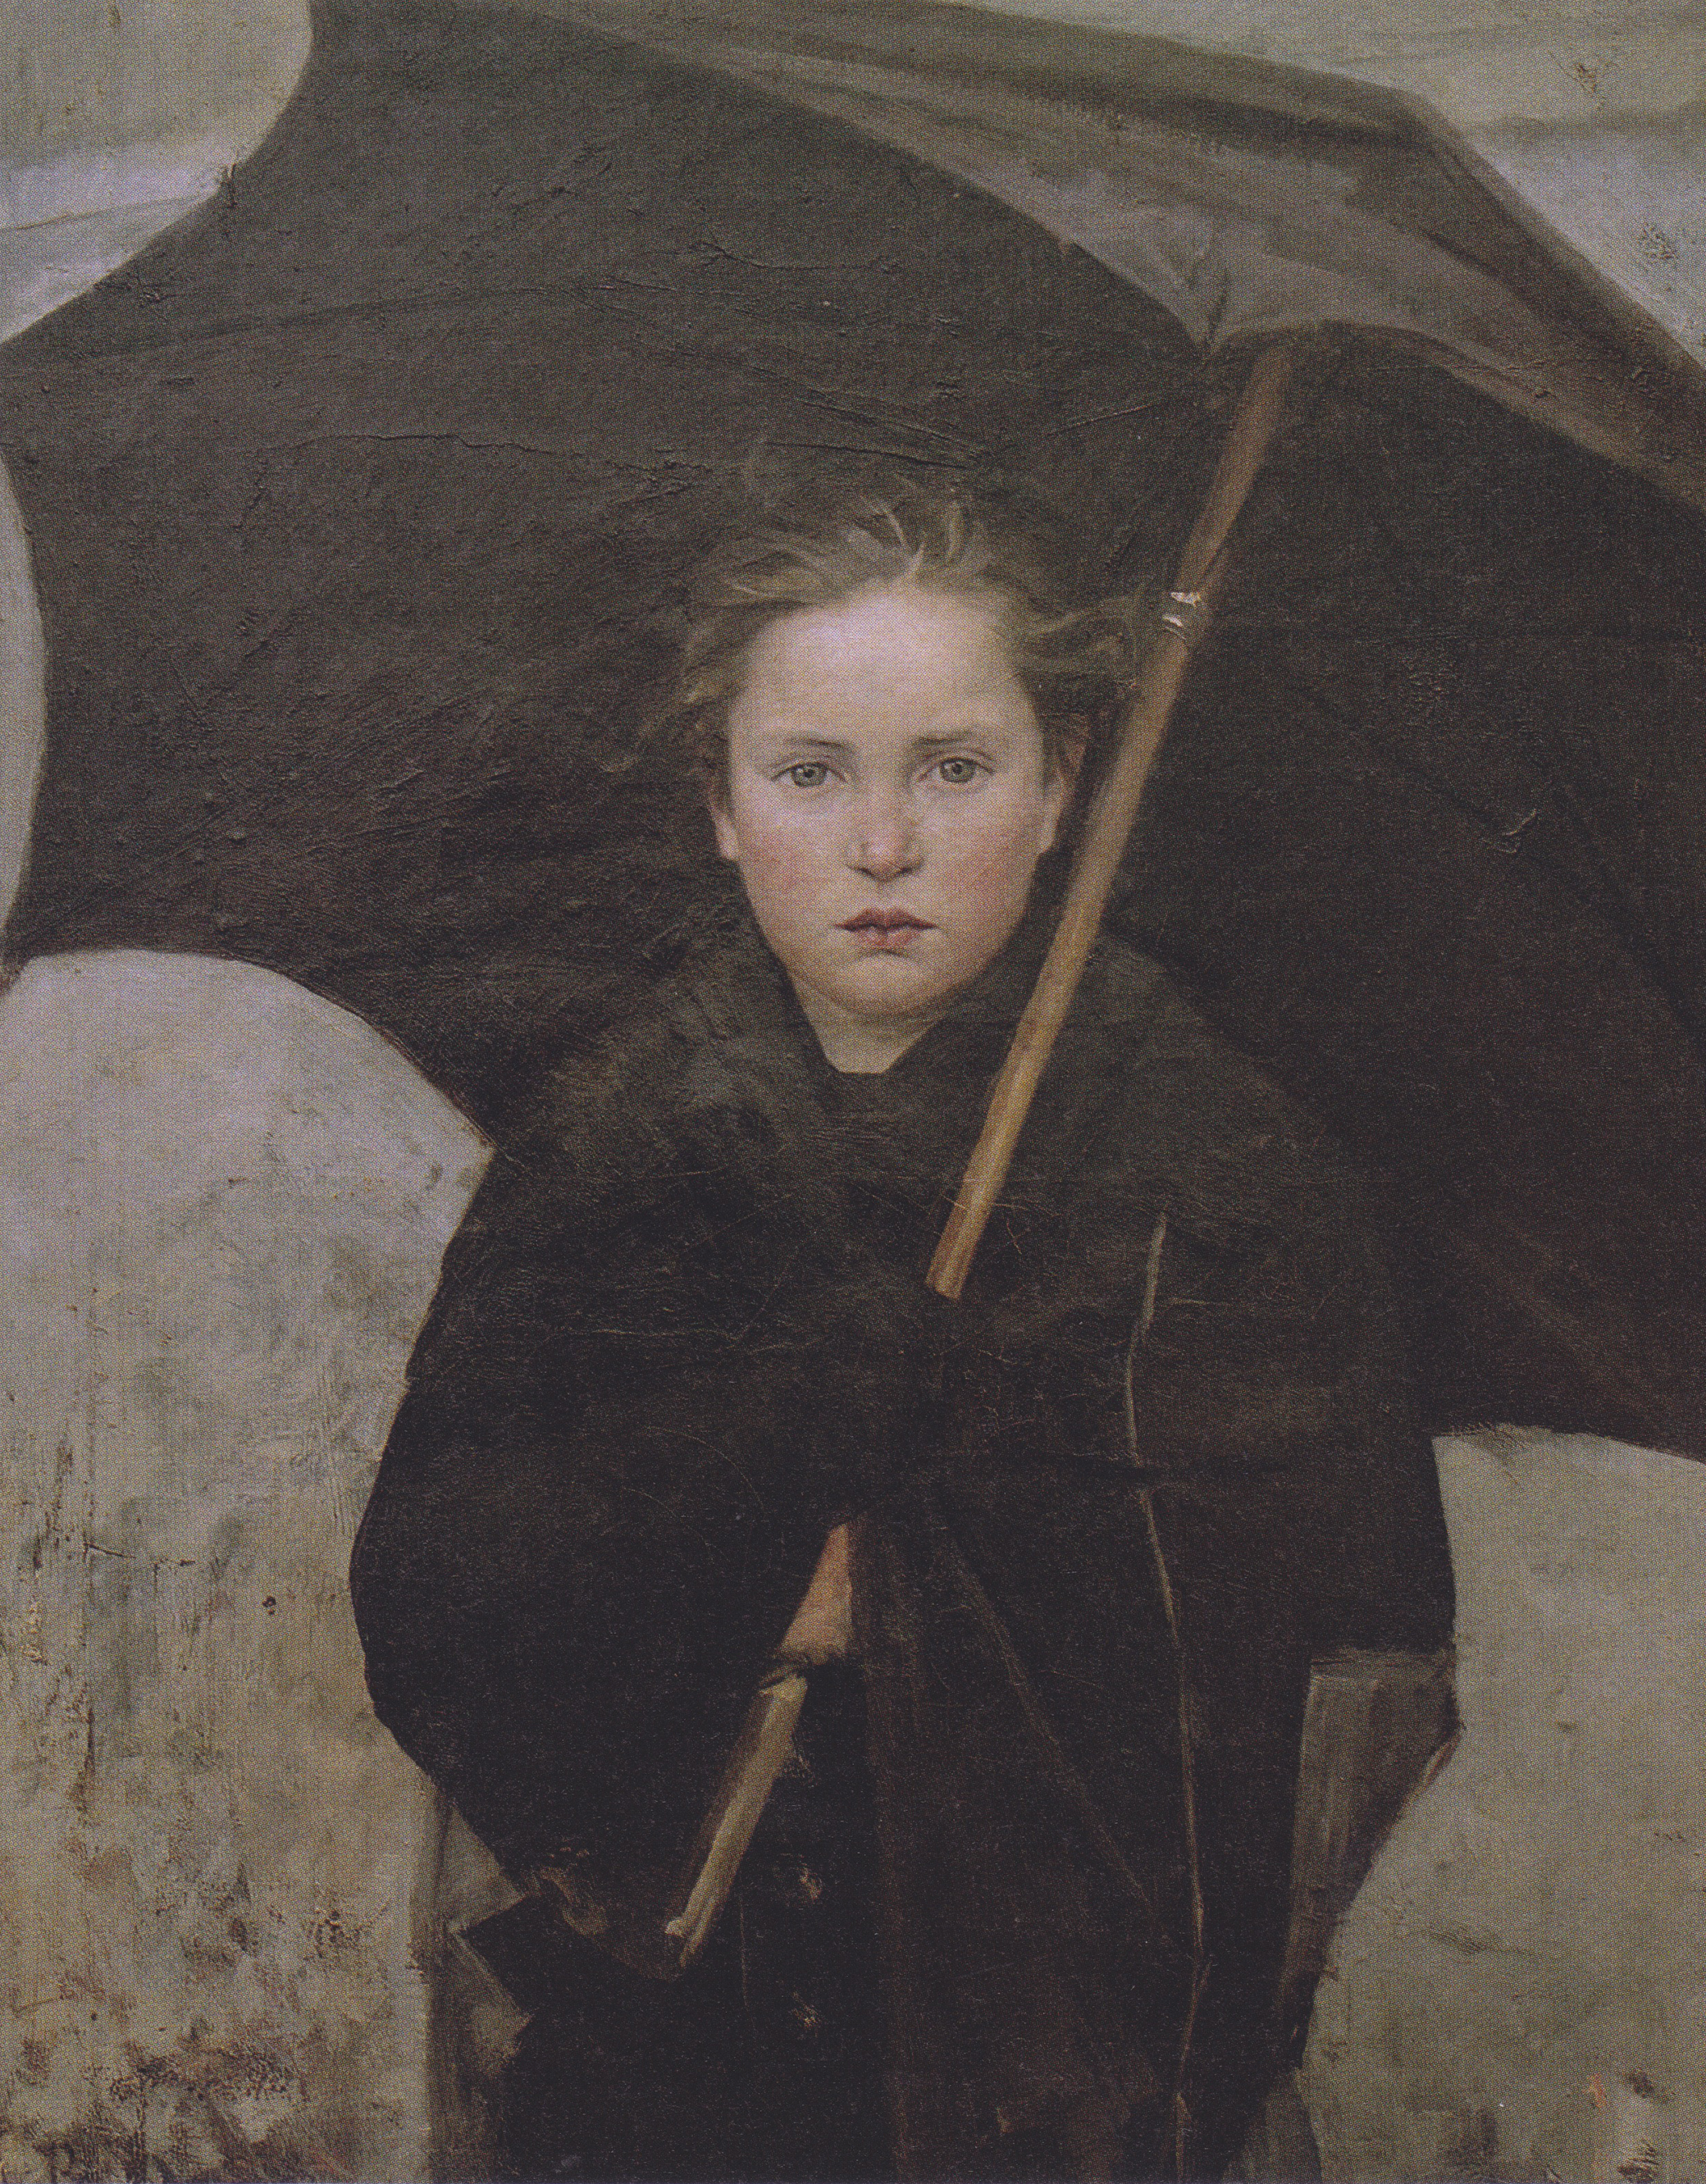 Painting of a young woman holding an umbrella. The Umbrella, by Marie Bashkirtseff, 1883. Wikimedia Commons, State Russian Museum.